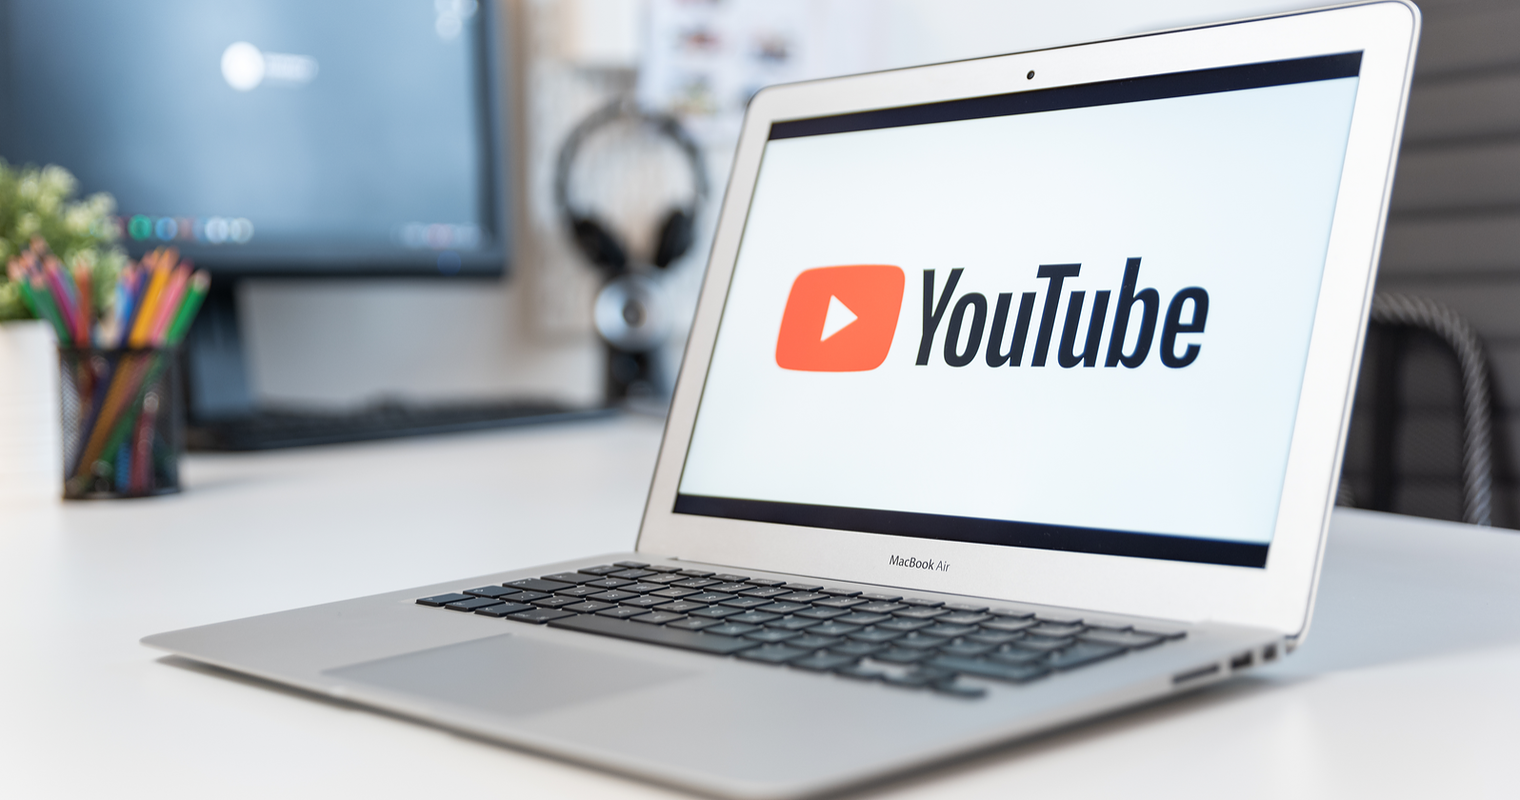 YouTube is Ramping Up Enforcement of its Community Guidelines